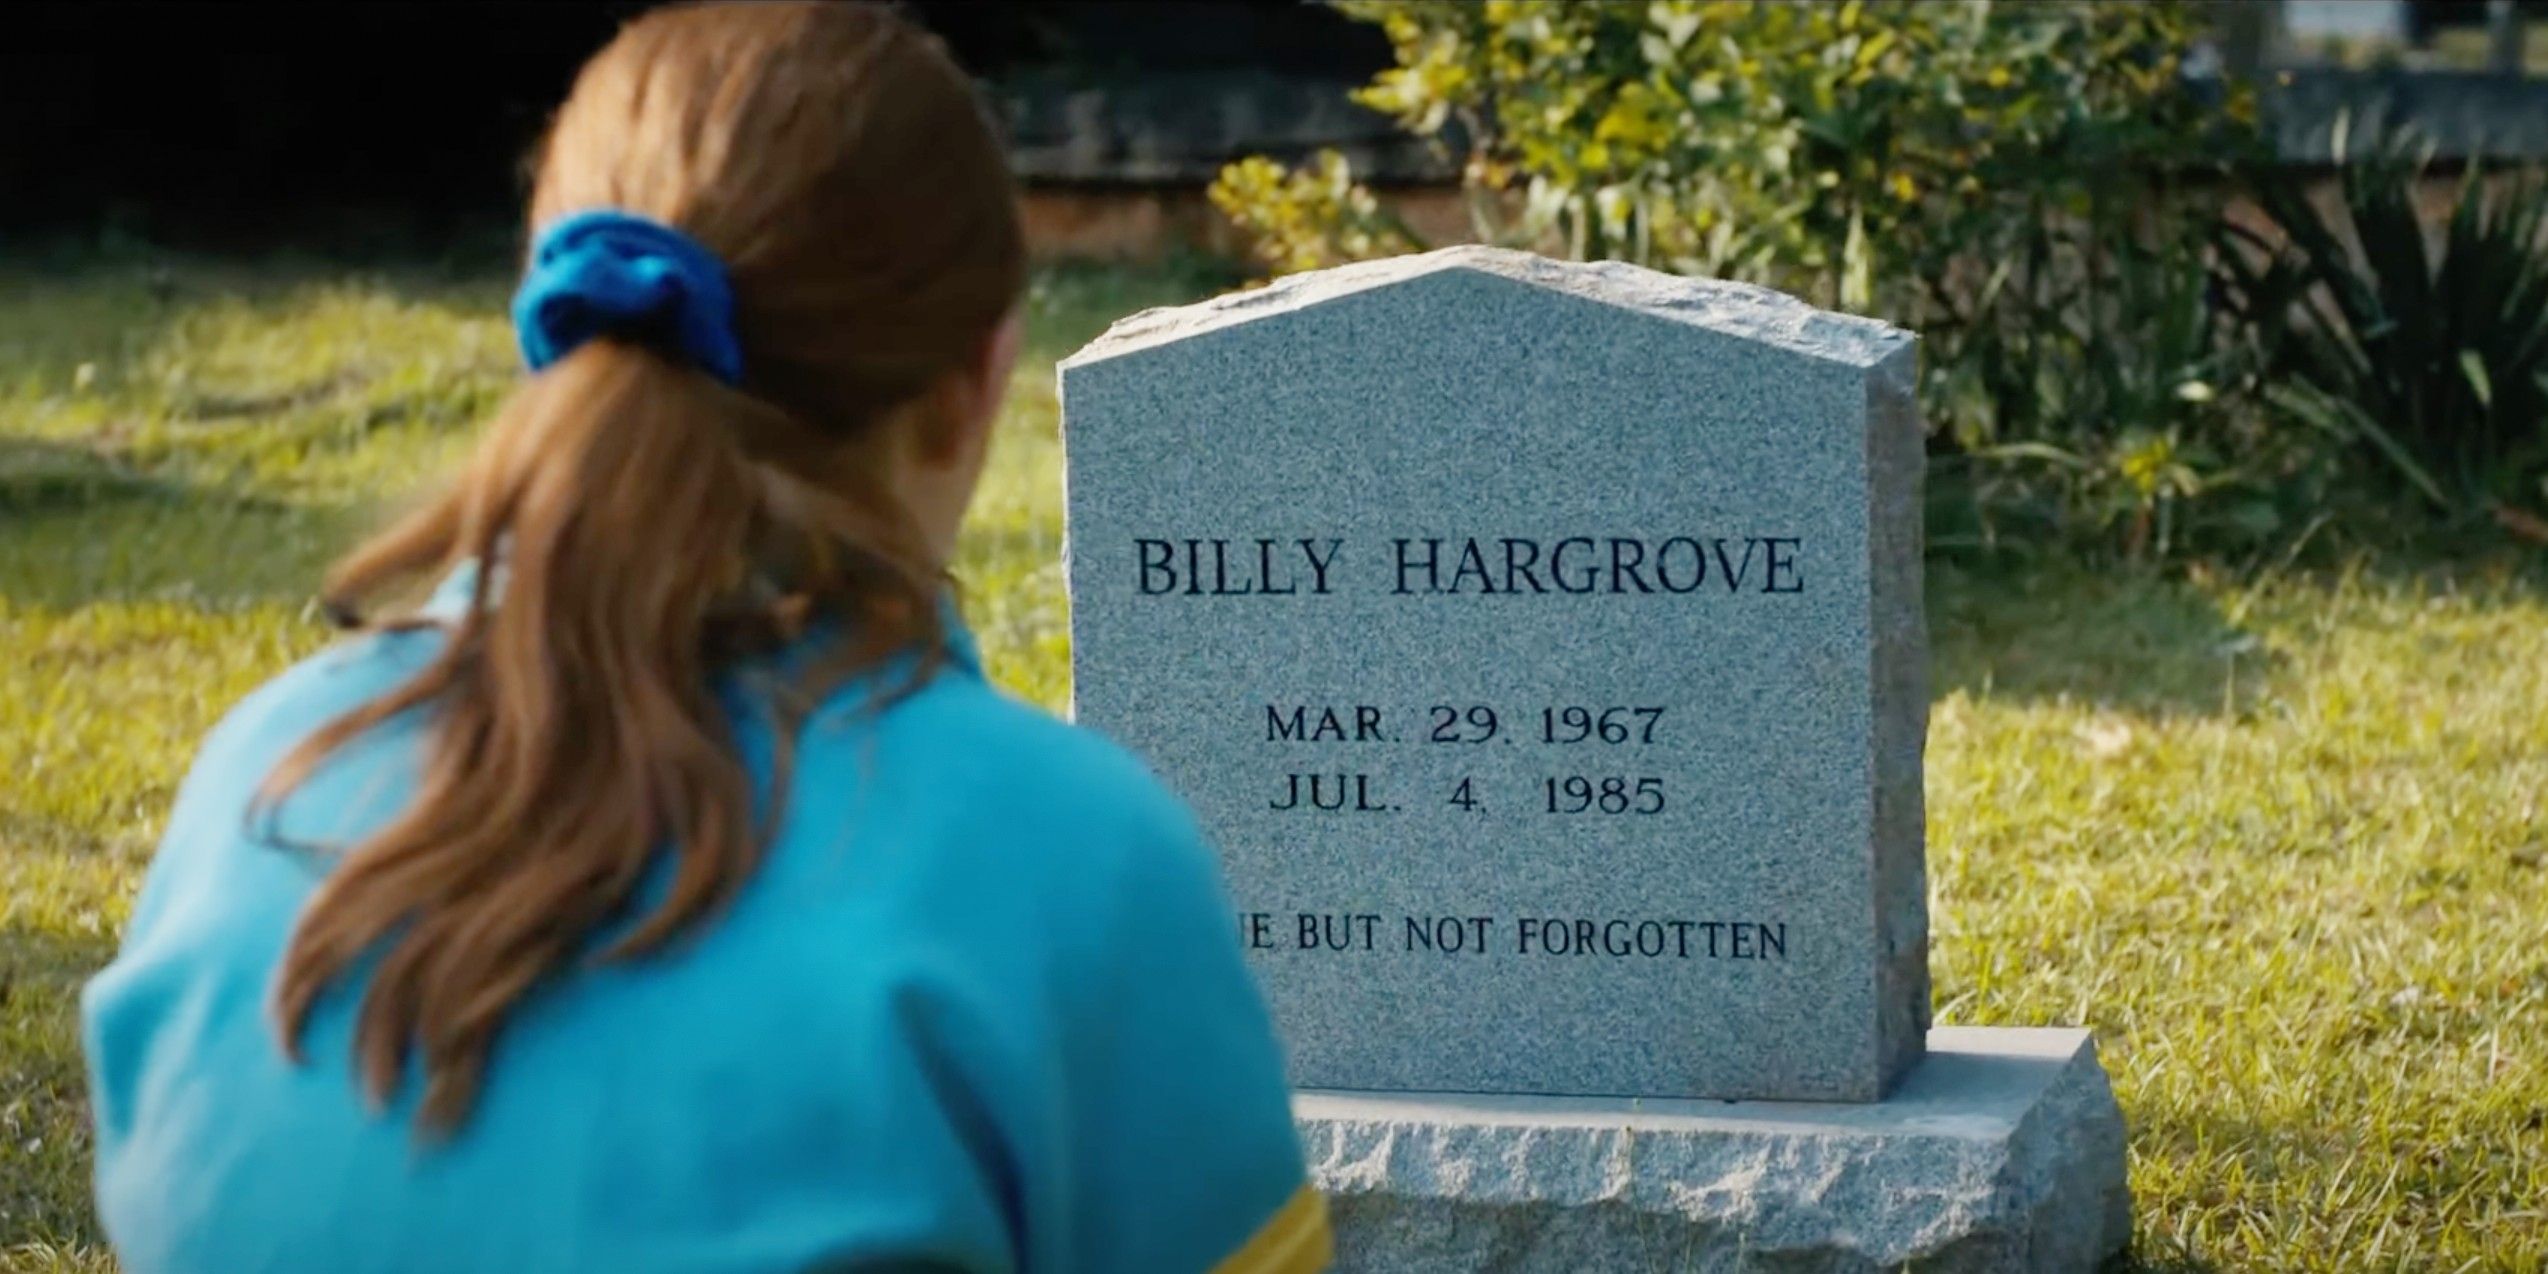 Max sits at Billy's grave, which reads "Billy Hargrove Mar. 29, 1967 - Jul. 4, 1985 Gone But Not Forgotten."